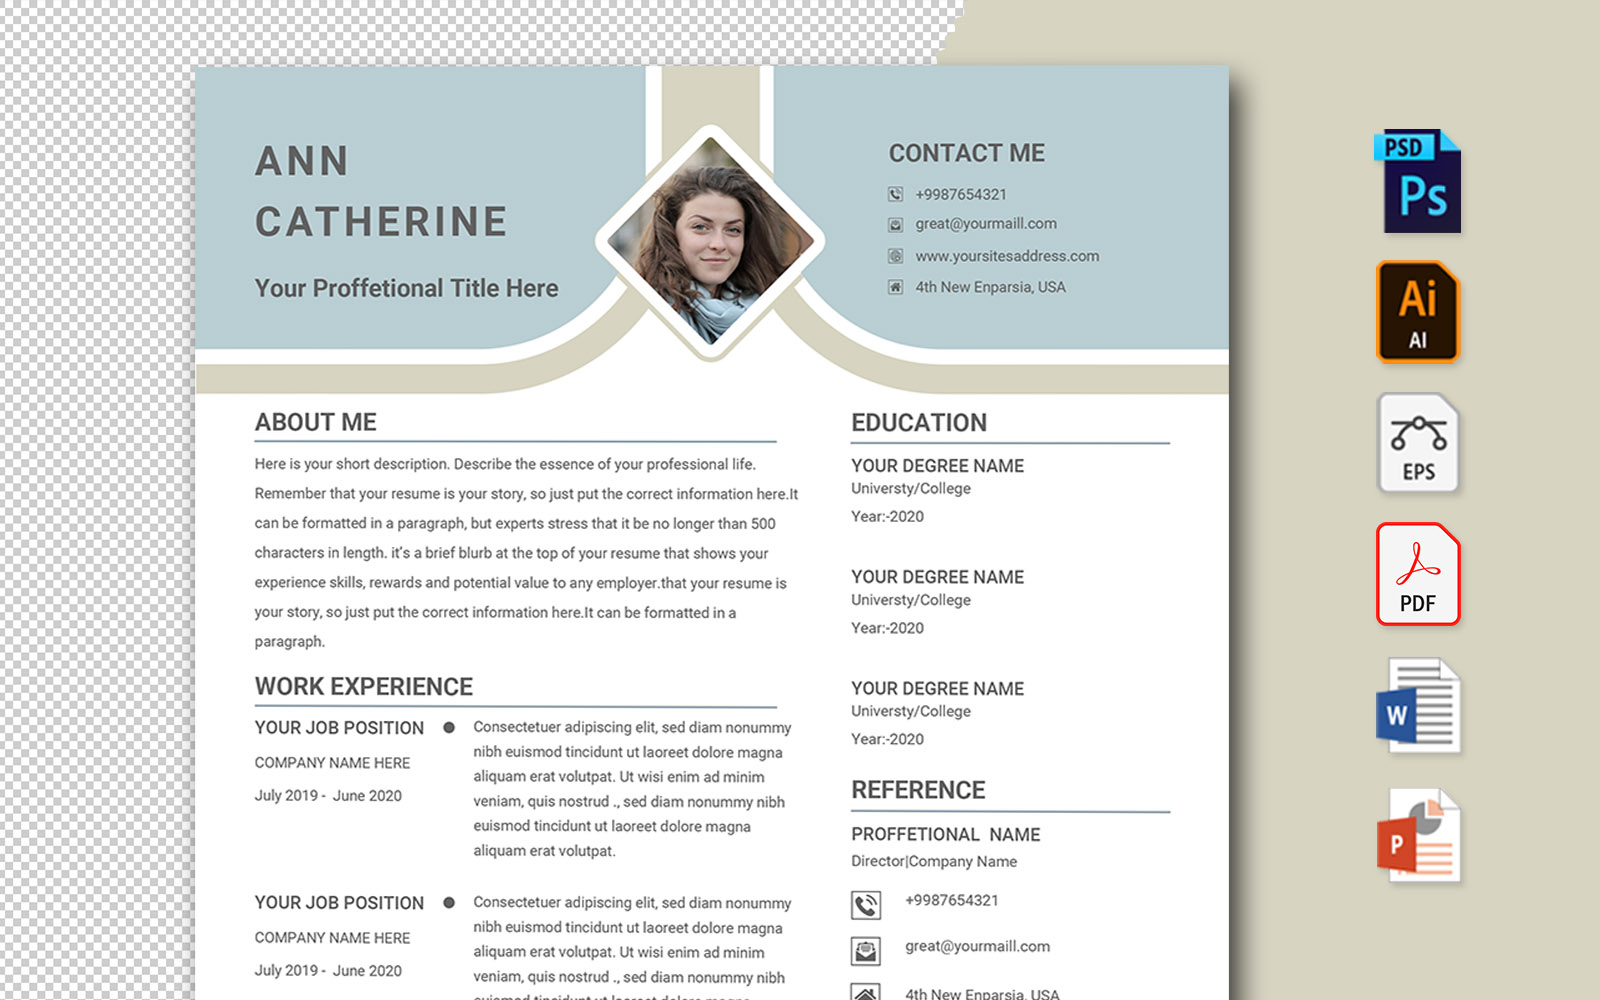 ANN Catherine Professional Resume Template